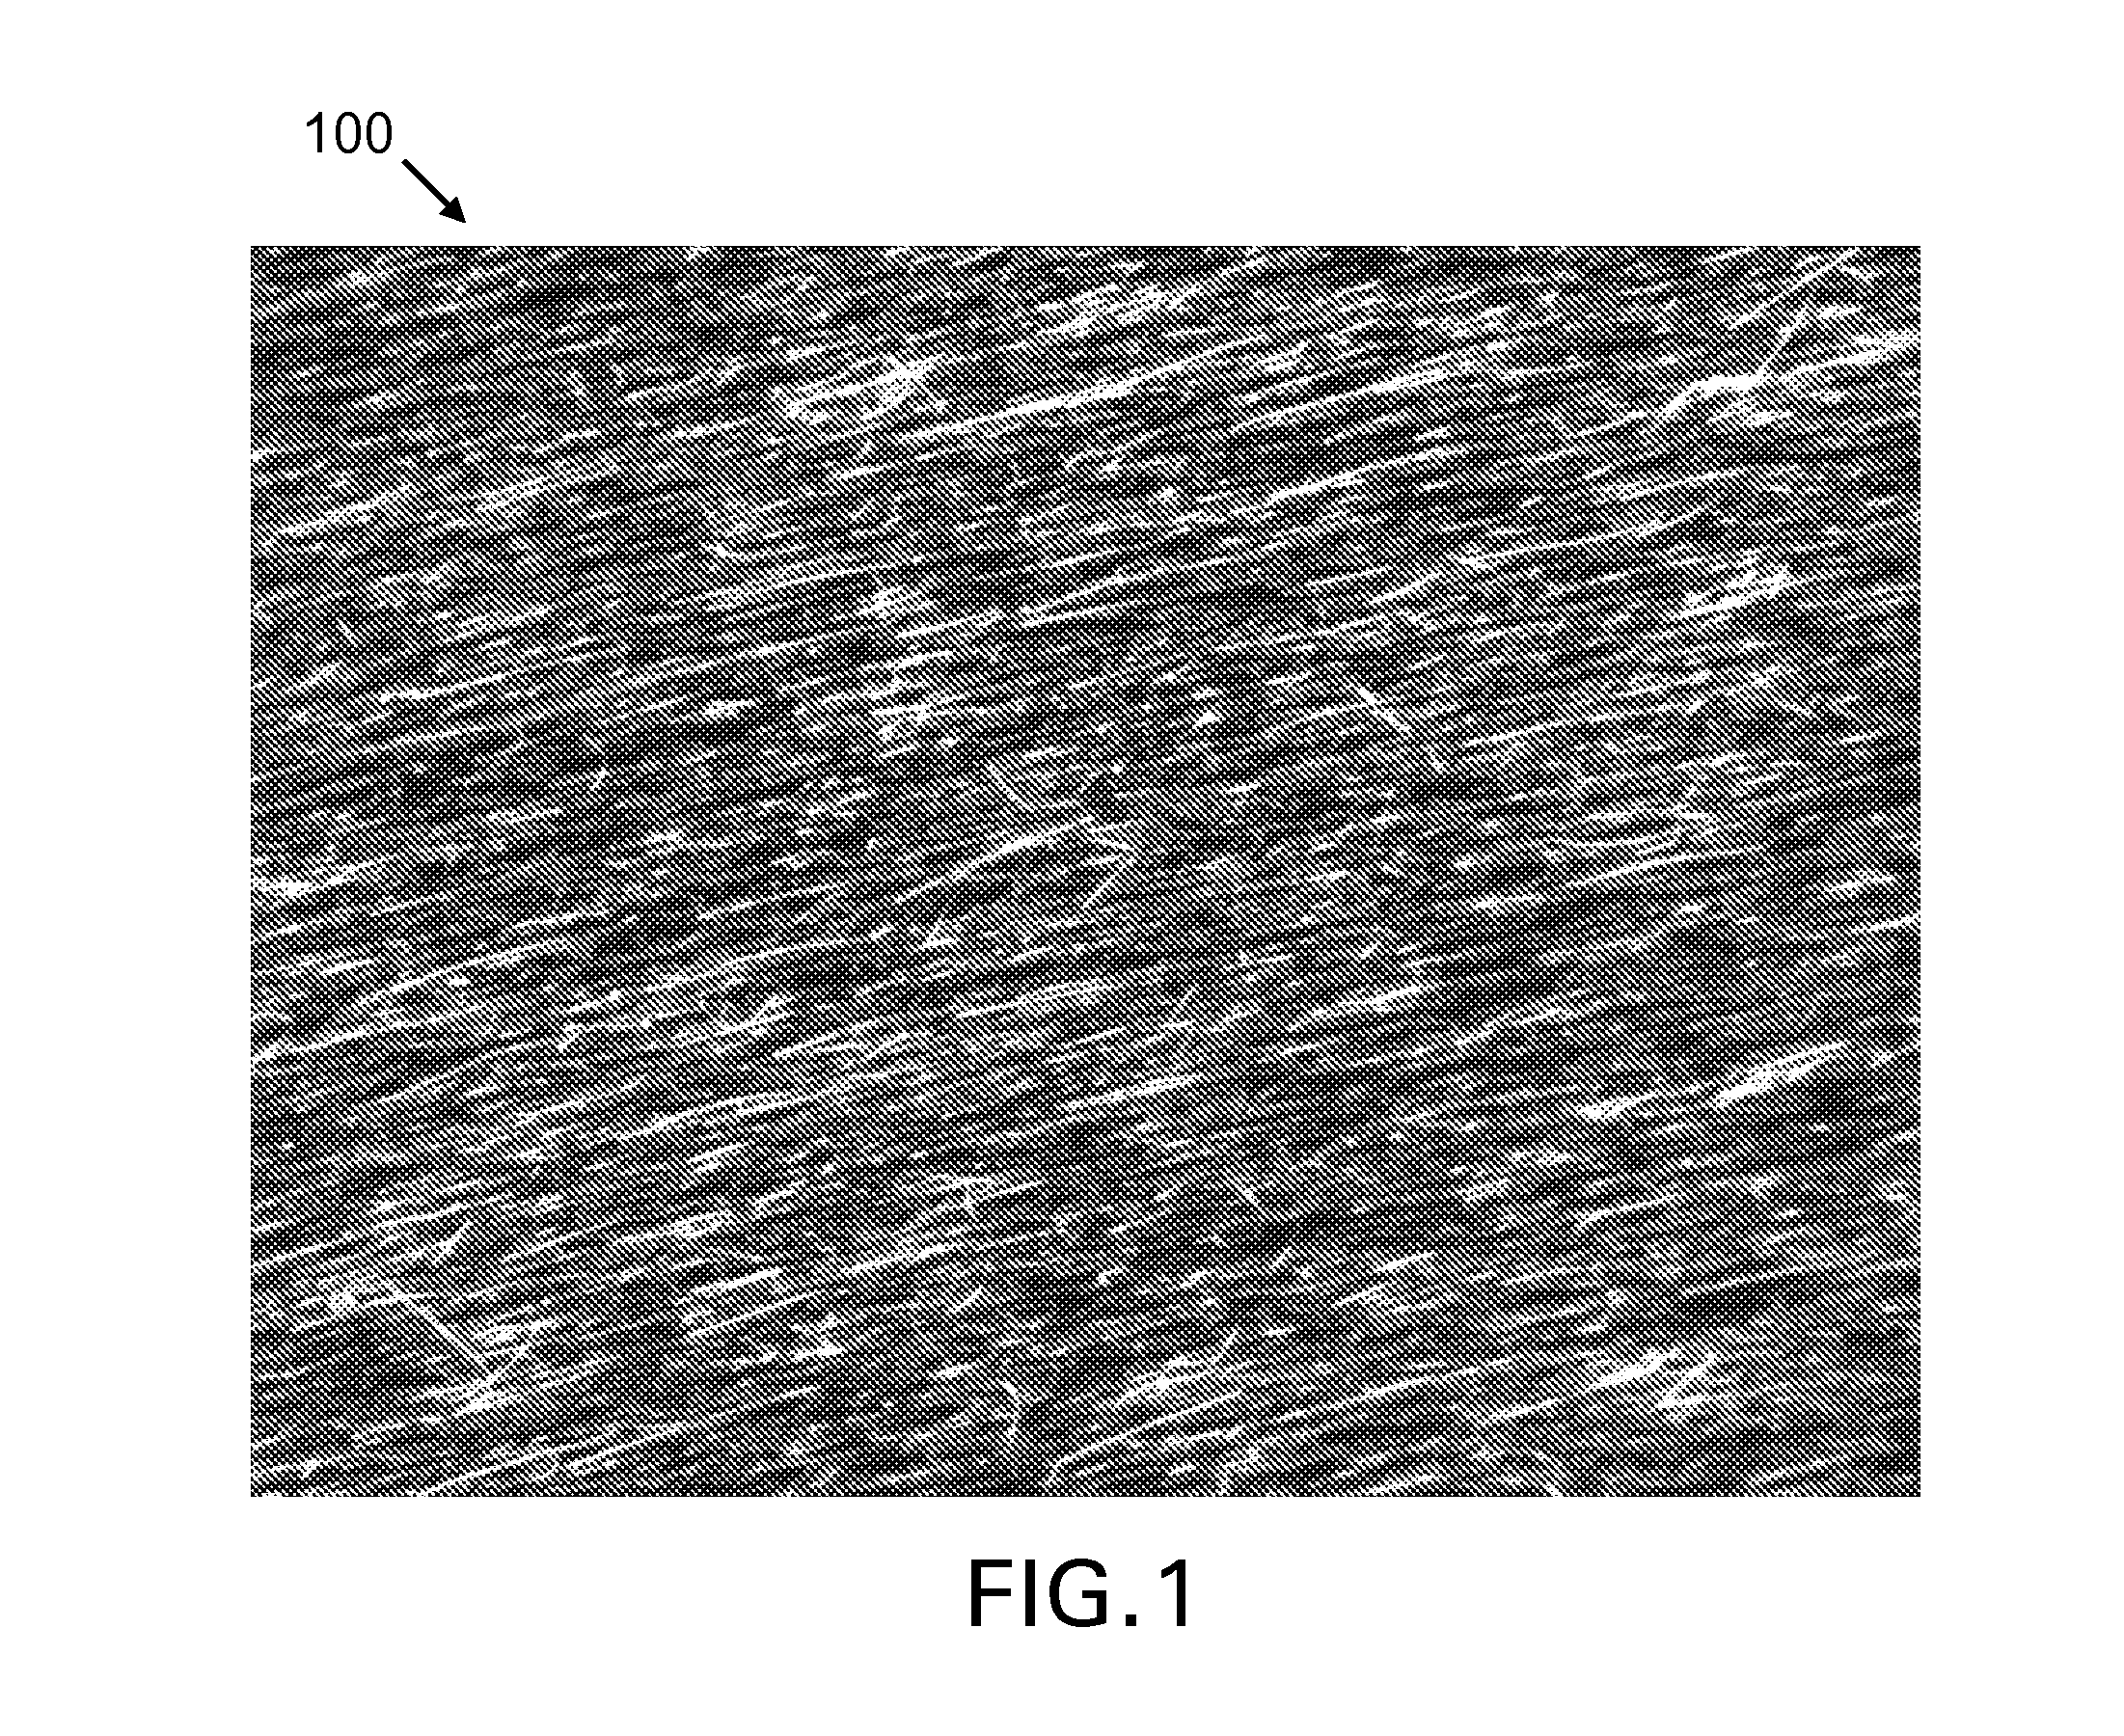 Large-Area Nanoenabled Macroelectronic Substrates and Uses Therefor